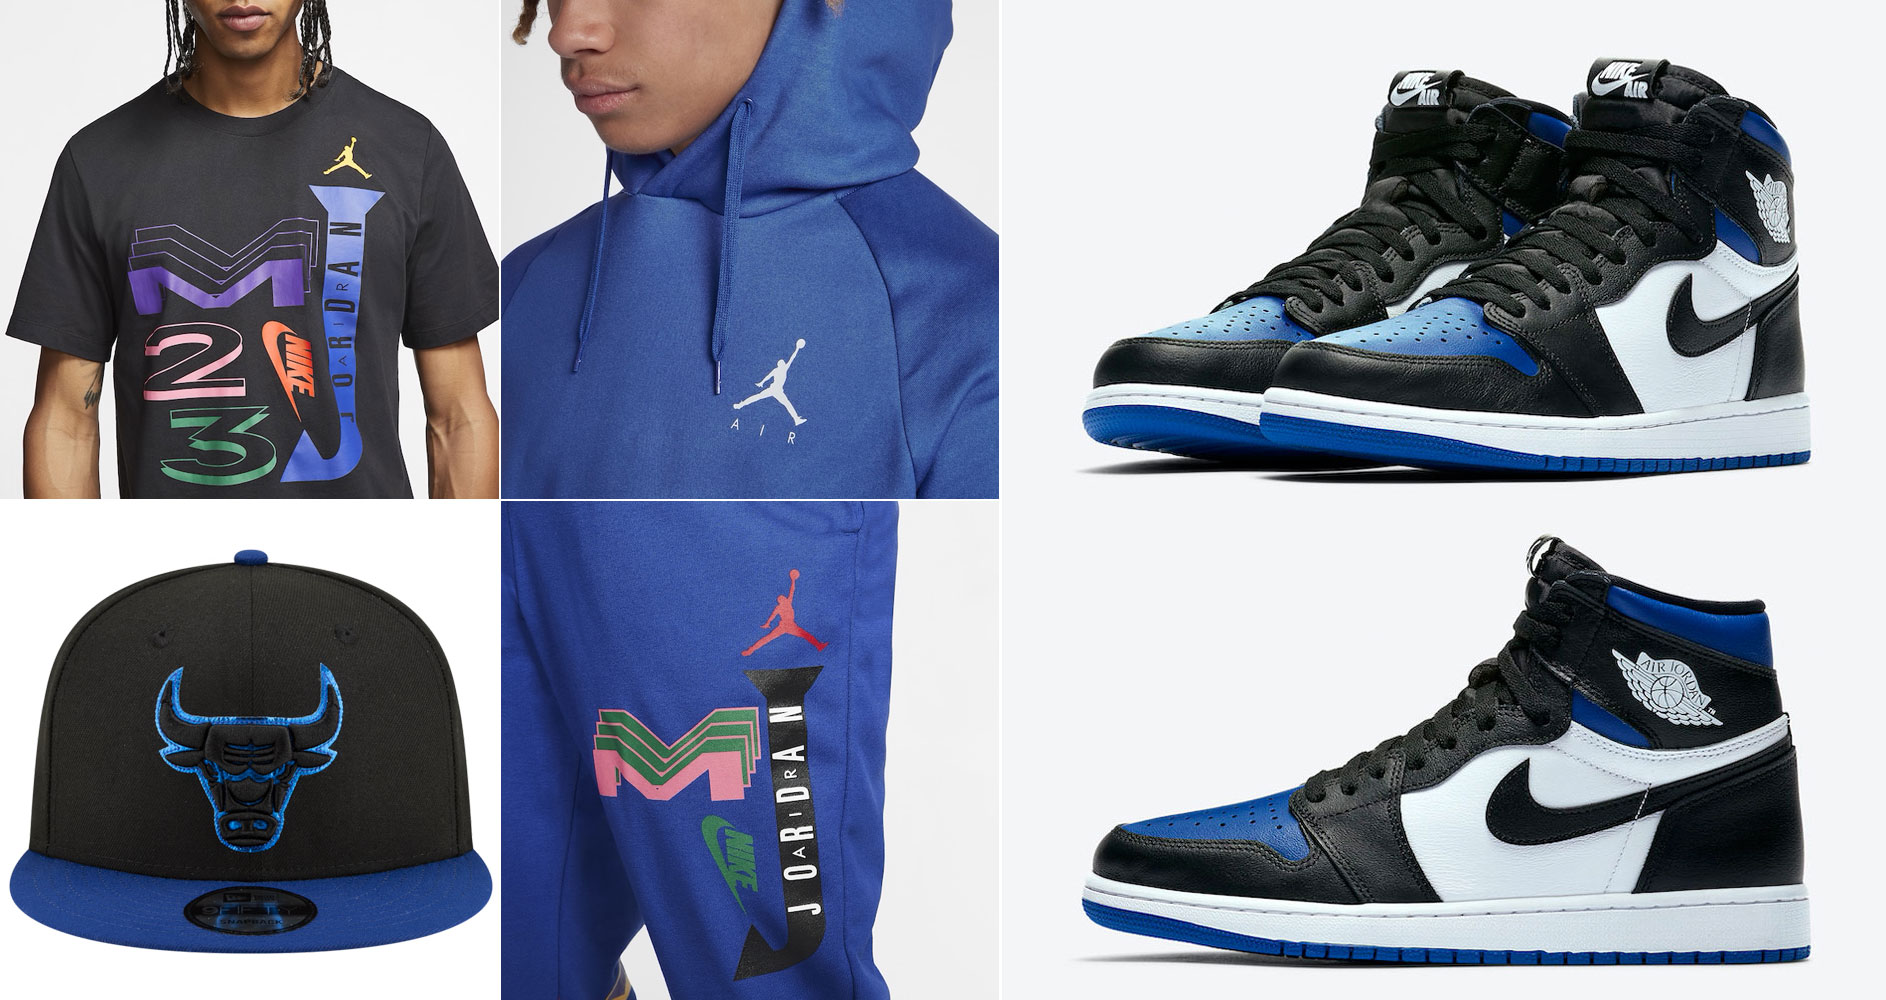 jordan one outfits